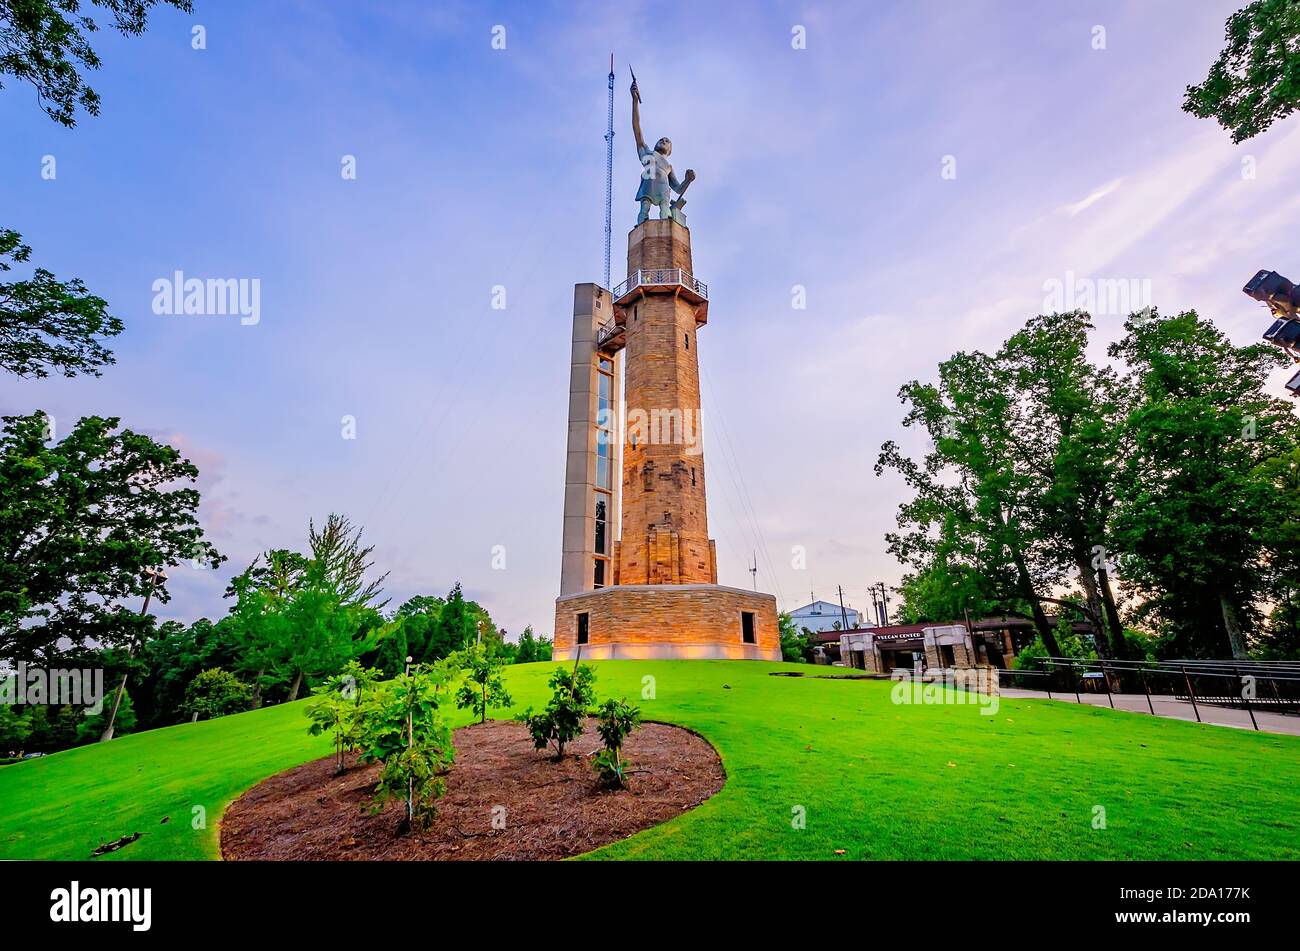 The Vulcan statue is pictured in Vulcan Park in Birmingham, Alabama. The iron statue depicts the Roman God of the fire and forge, Vulcan. Stock Photo